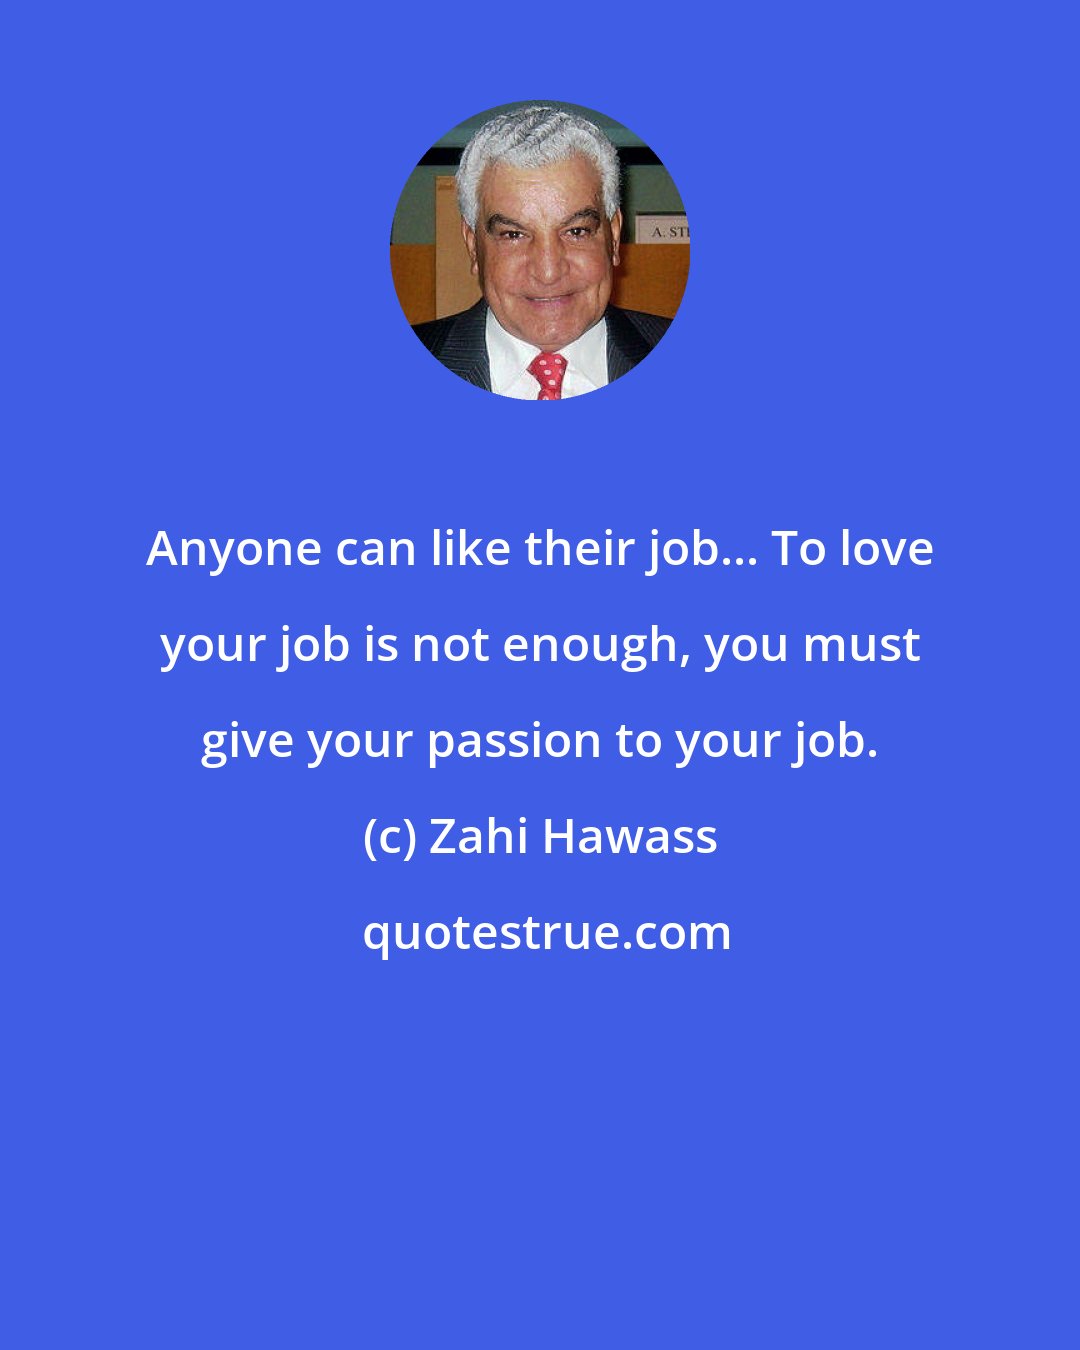 Zahi Hawass: Anyone can like their job... To love your job is not enough, you must give your passion to your job.